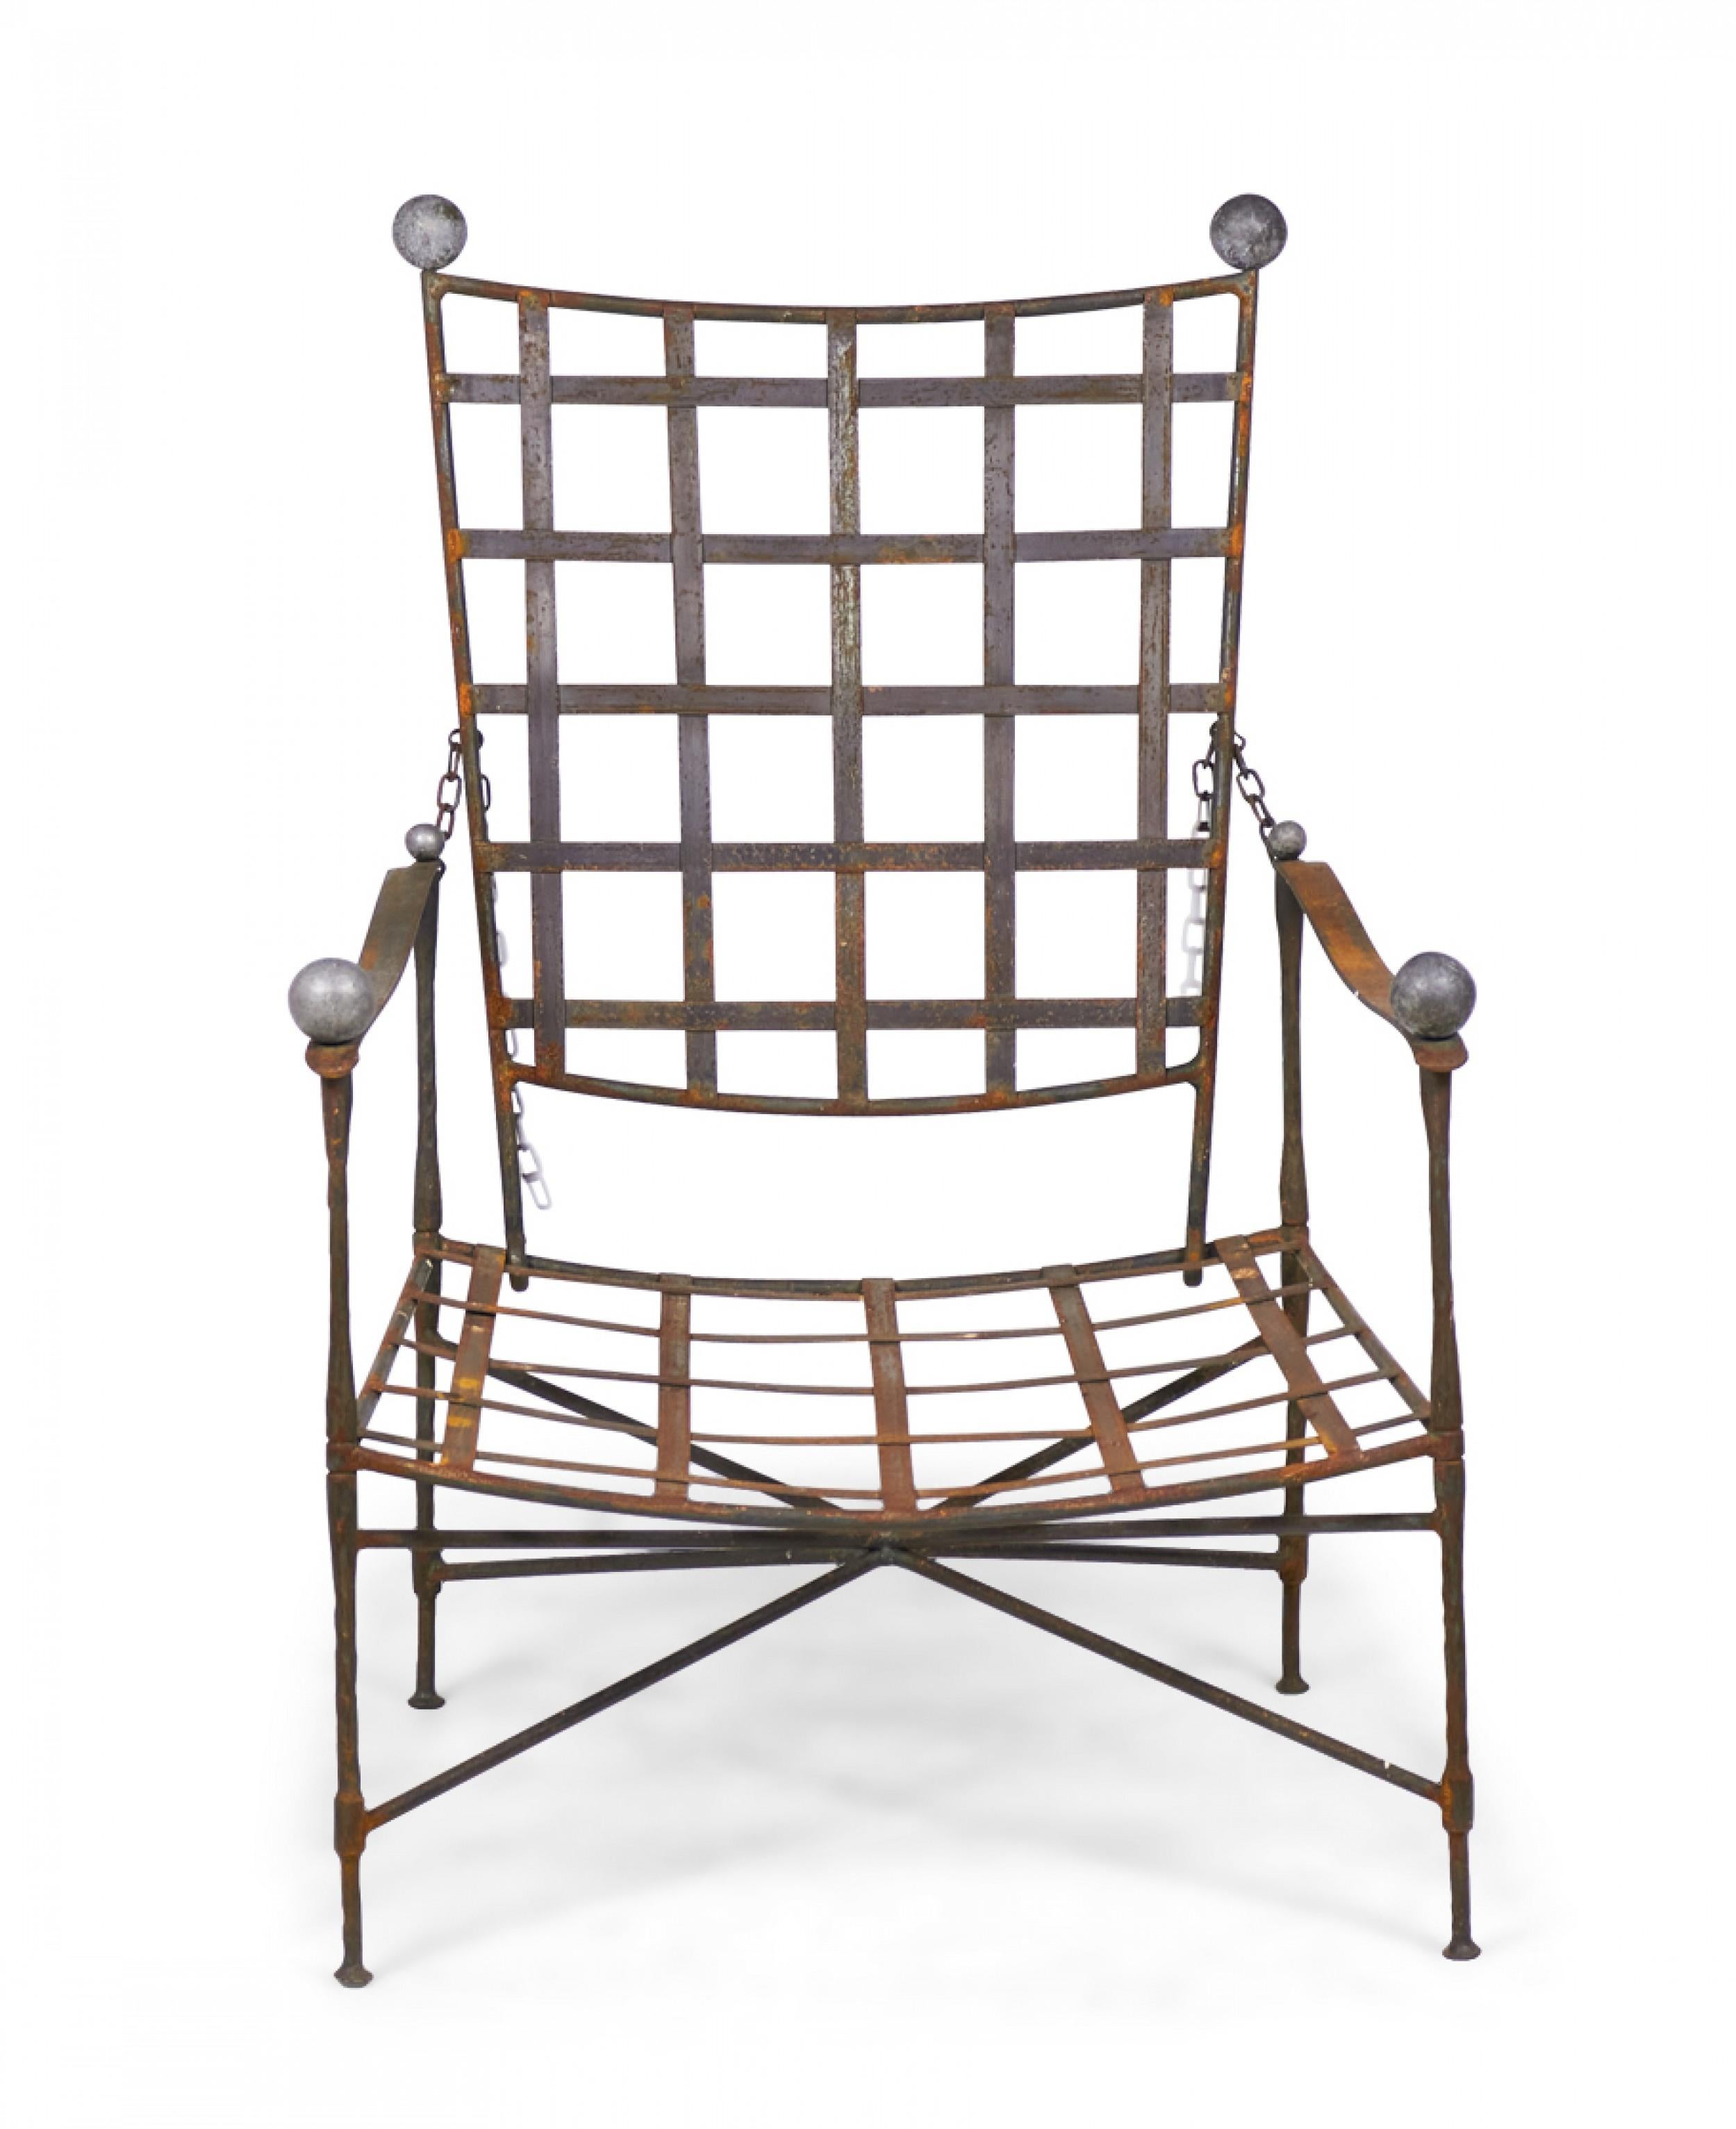 American mid-century outdoor adjustable reclining lounge / armchair with a latticed back and seat supported in an iron frame with ball finials on the chair back corners and armrests, resting on four straight iron legs connected by a stretcher base.